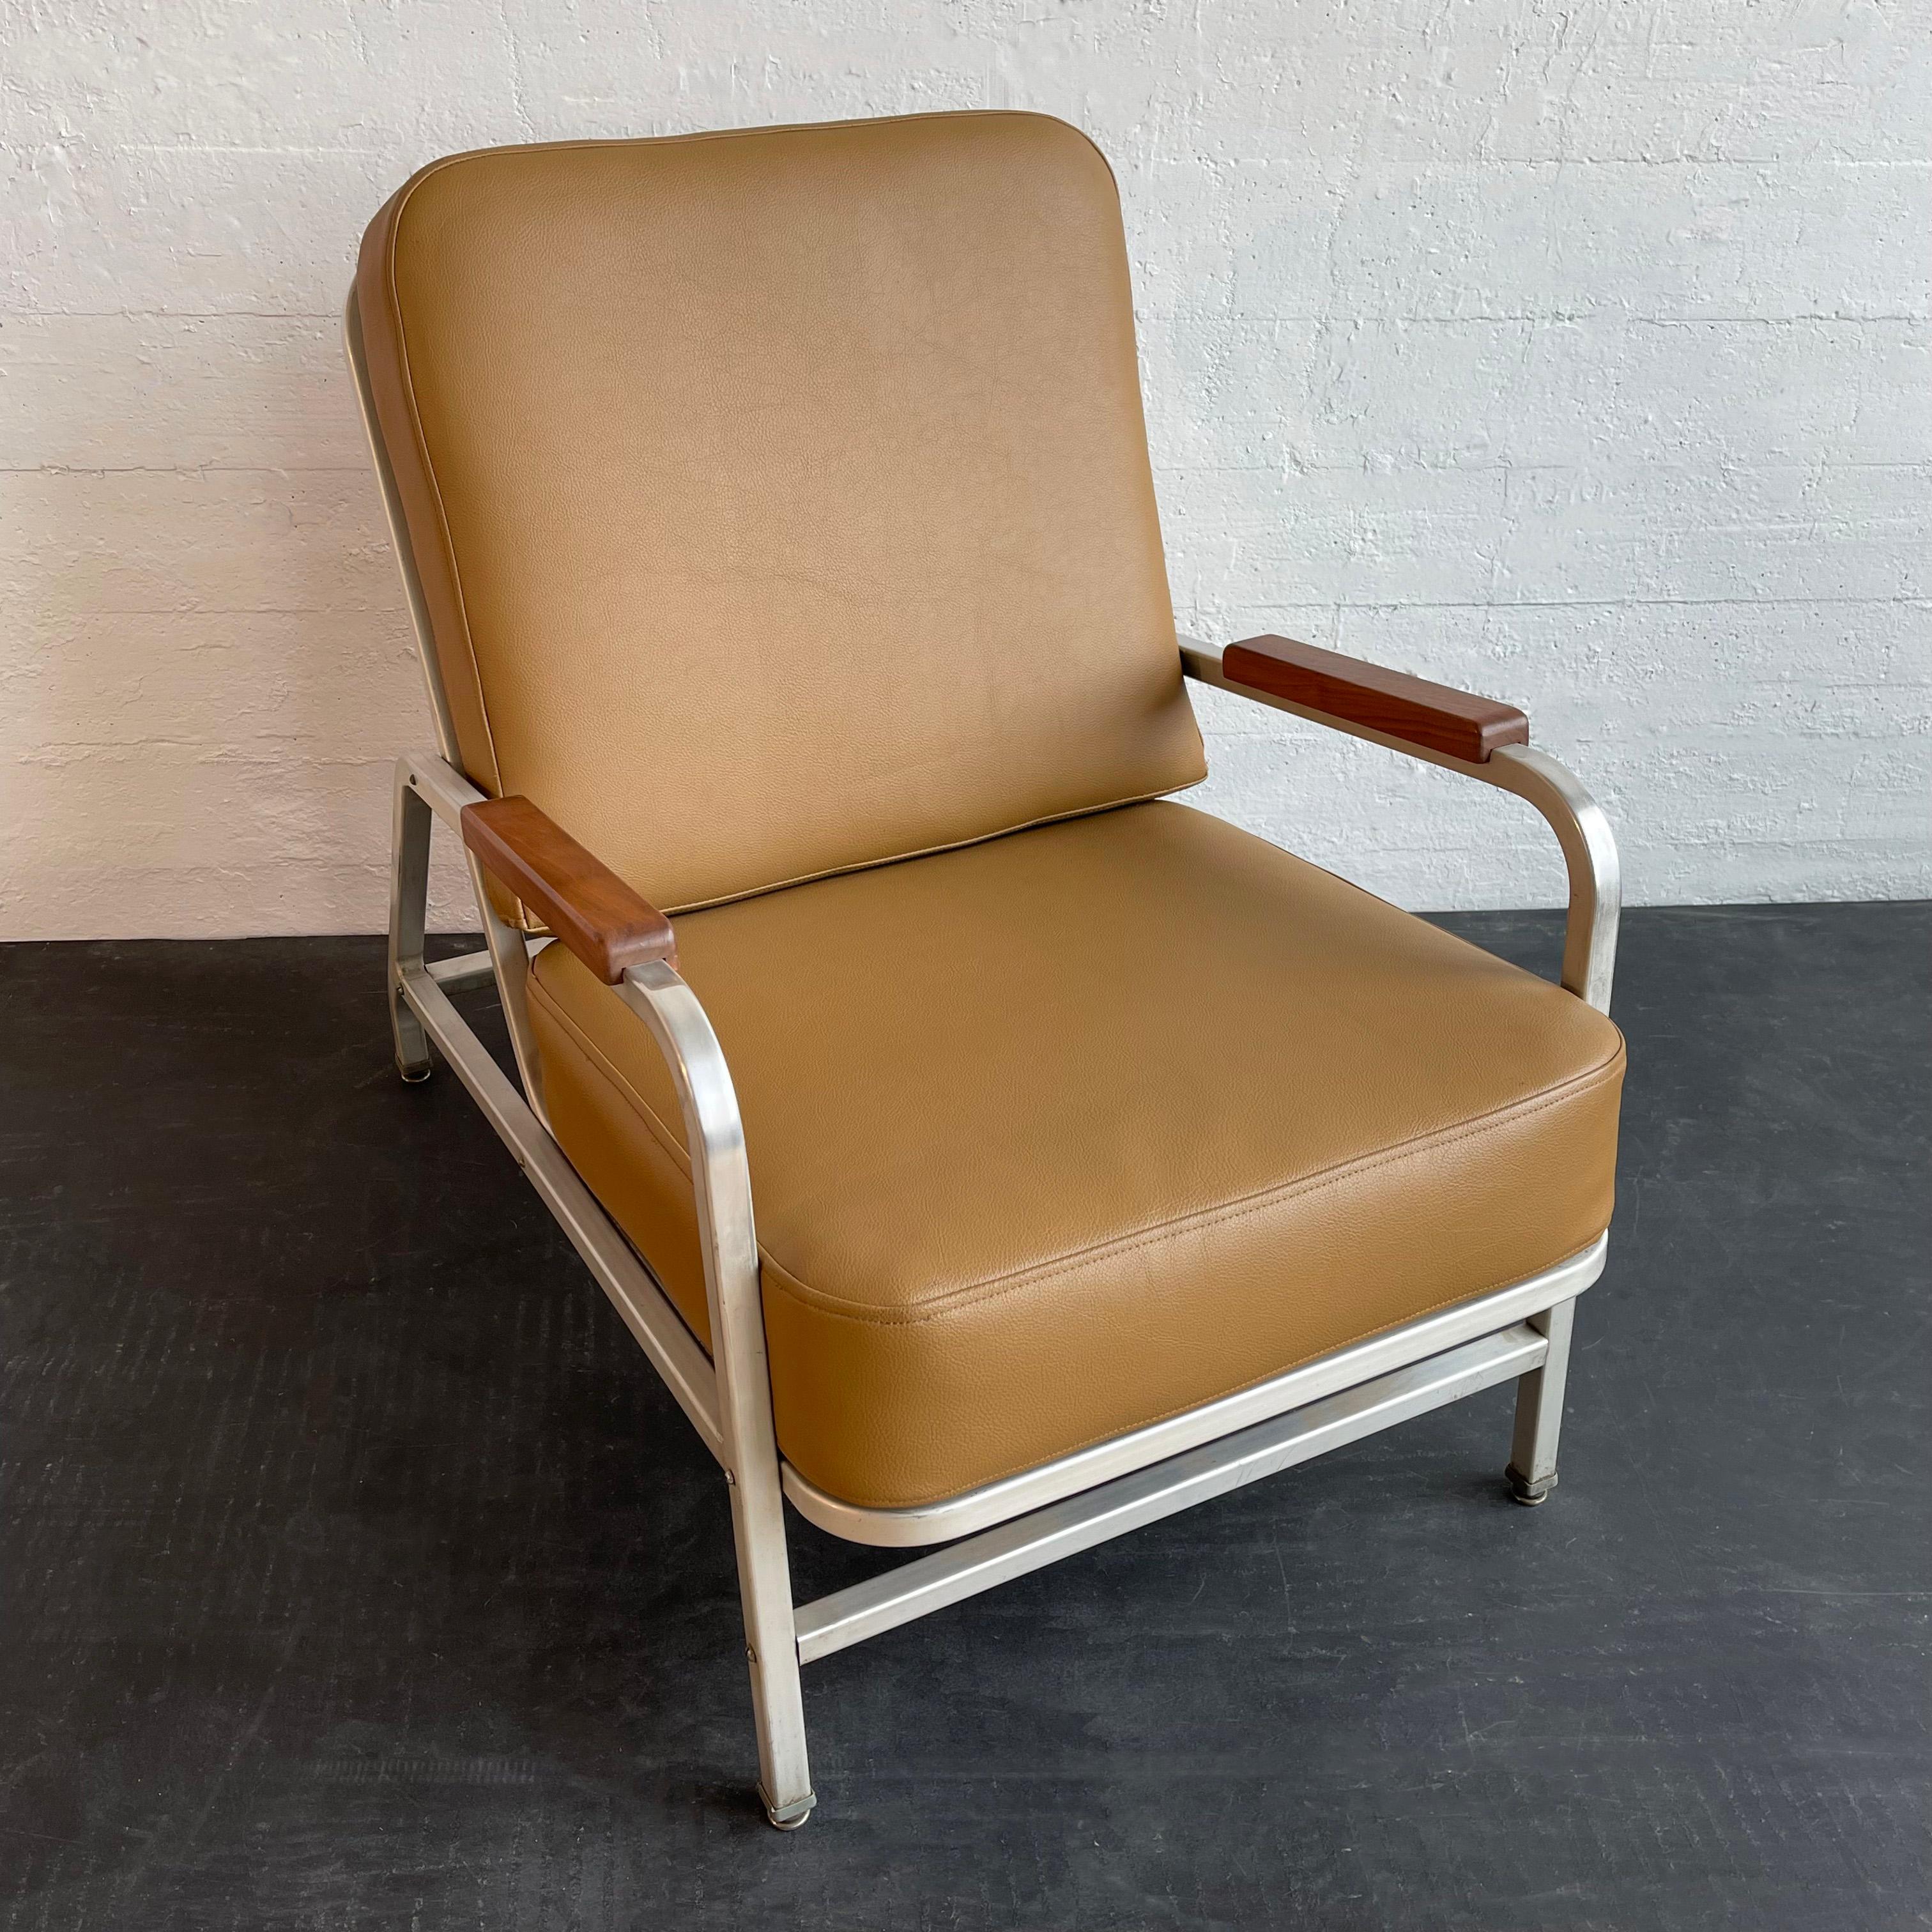 20th Century Machine-Age Mid-Century Aluminum Lounge Chair For Sale